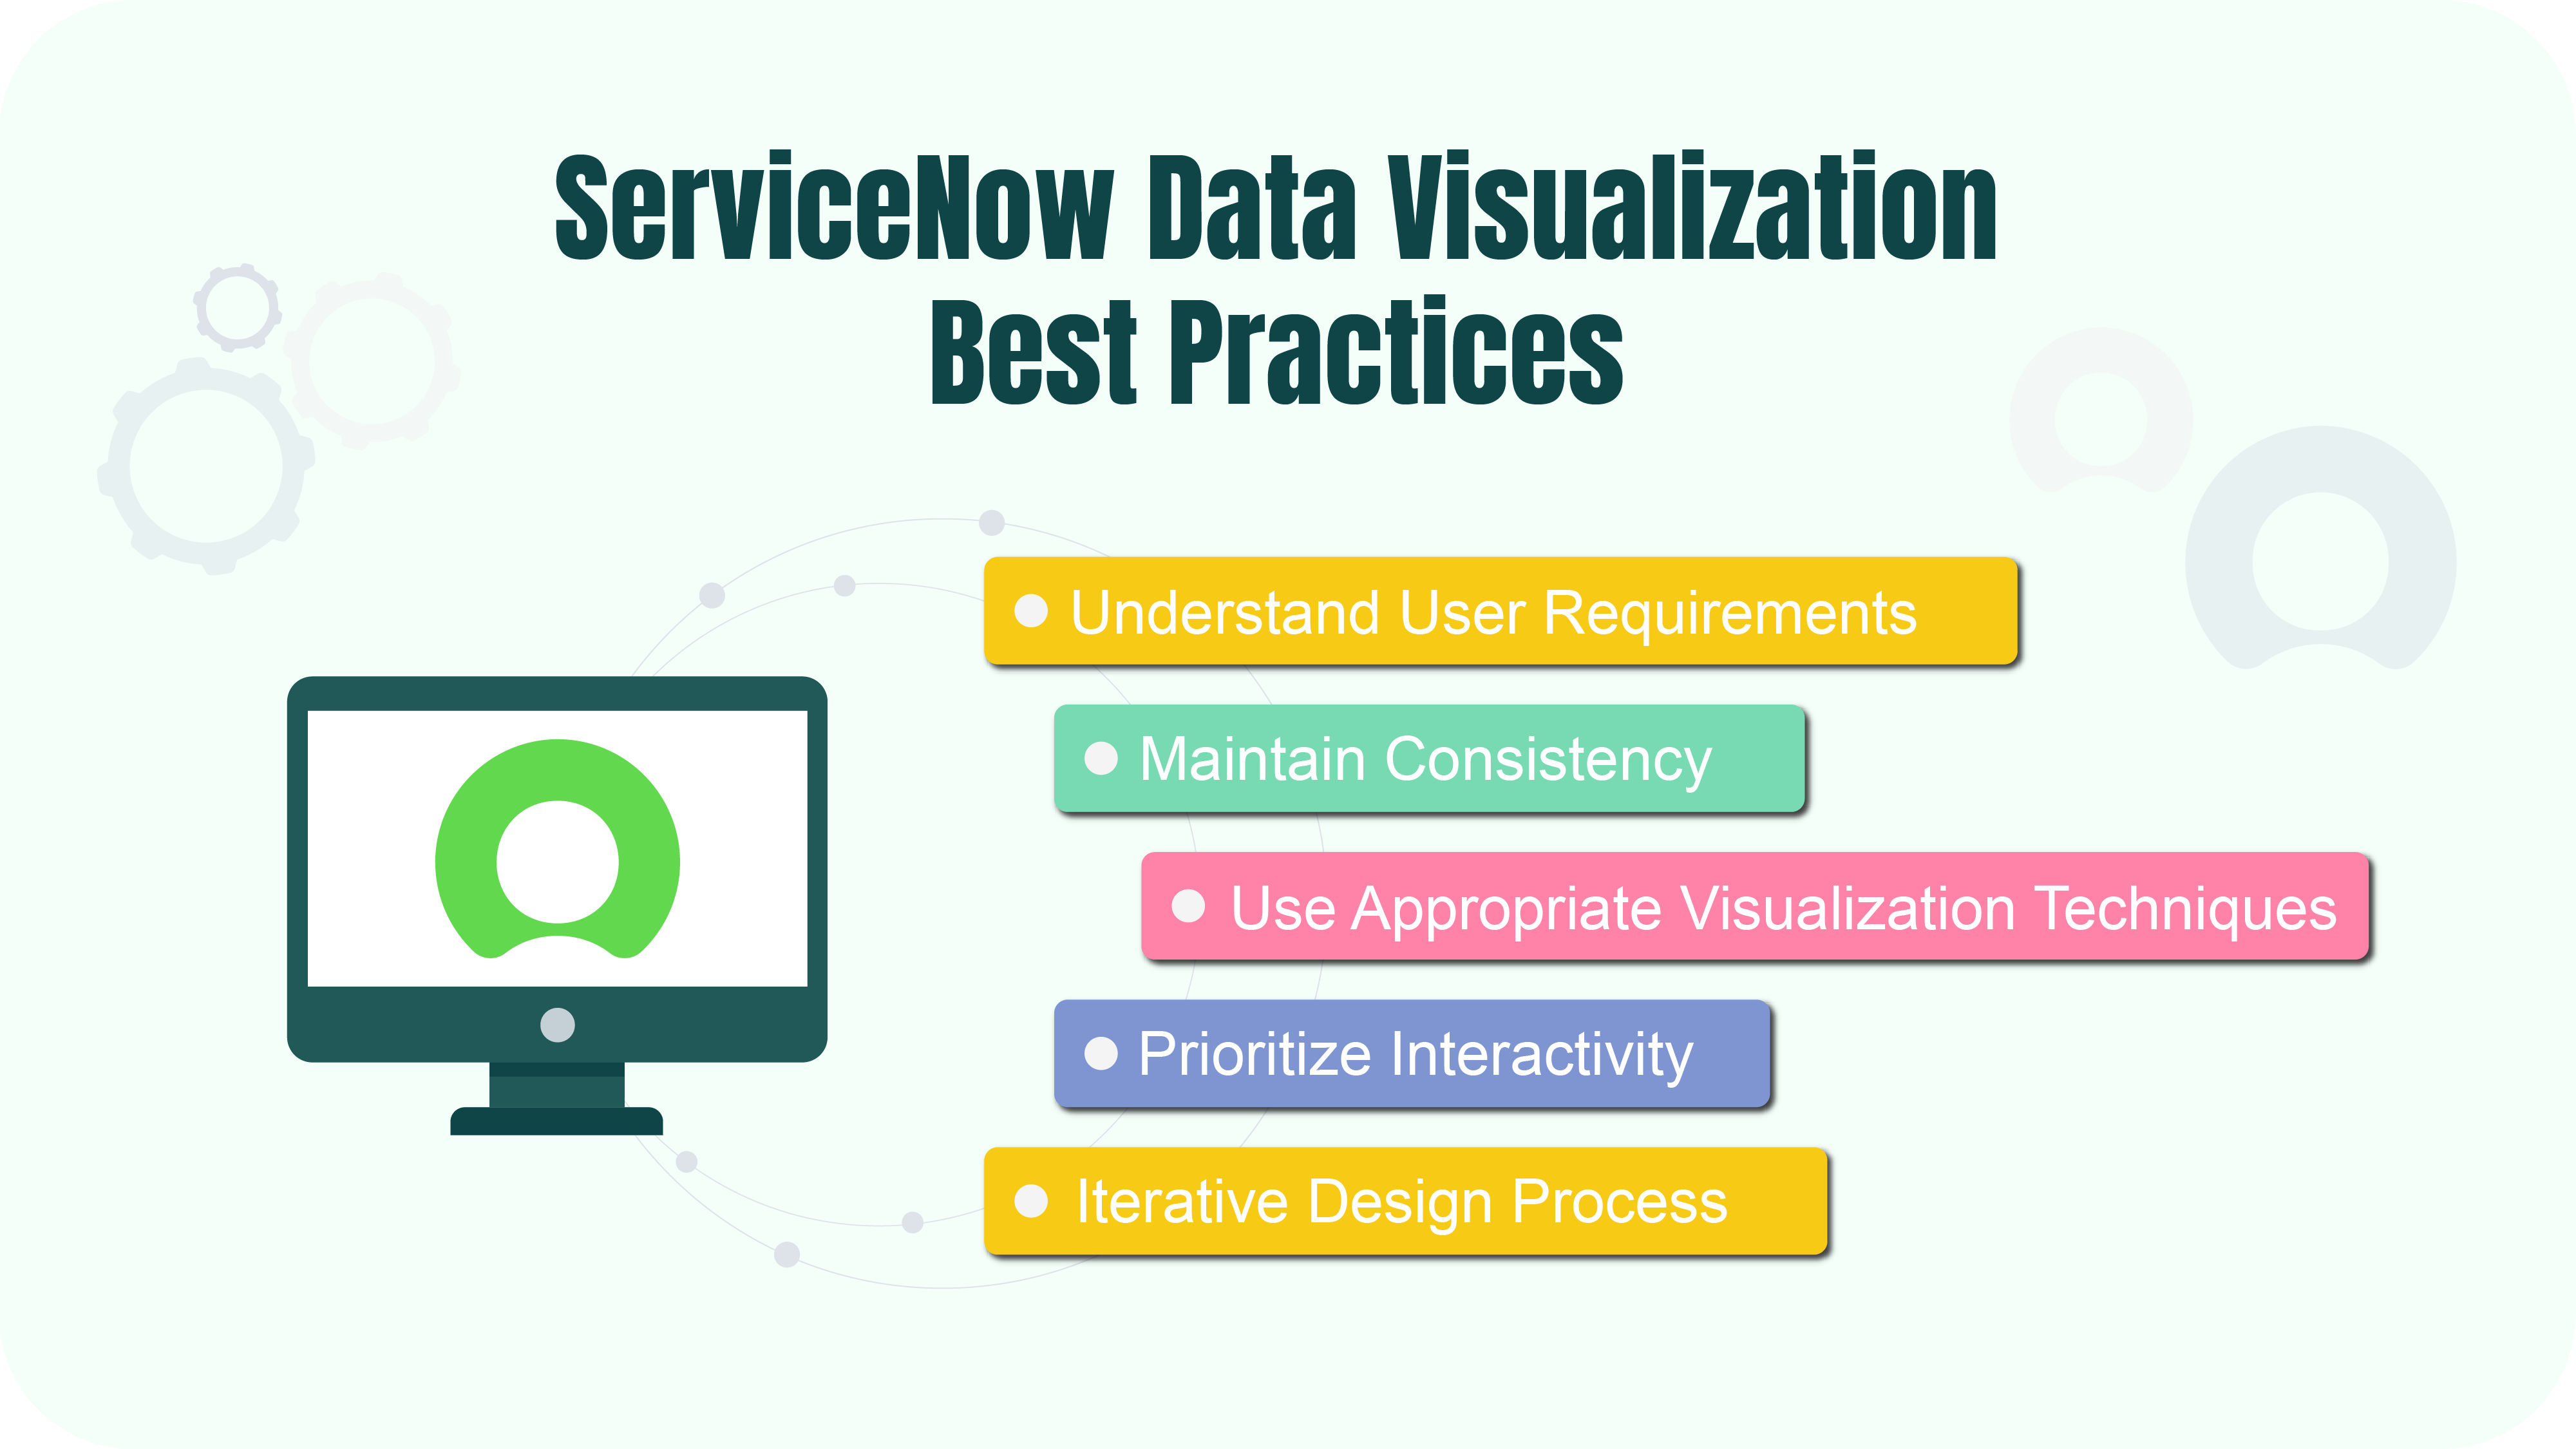 Best Practices for ServiceNow Data Visualization